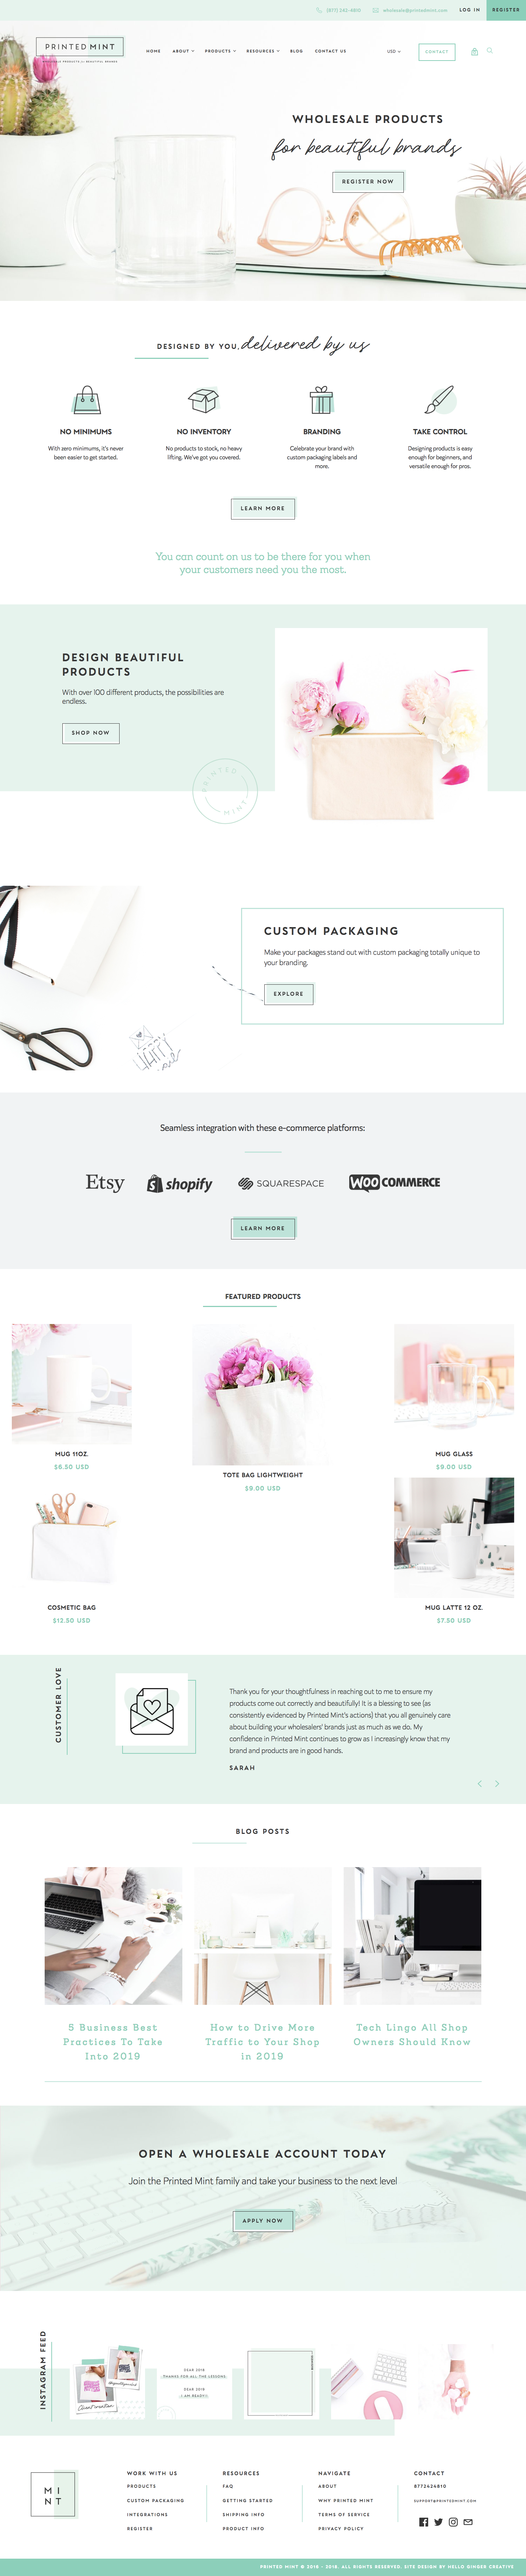 Printed Mint's website is absolutely gorgeous! We love how all the elements — font, colors, shapes, design, and images — come together to create this cohesive look. Printed Mint has used many Haute Stock photos throughout their site that go with the…